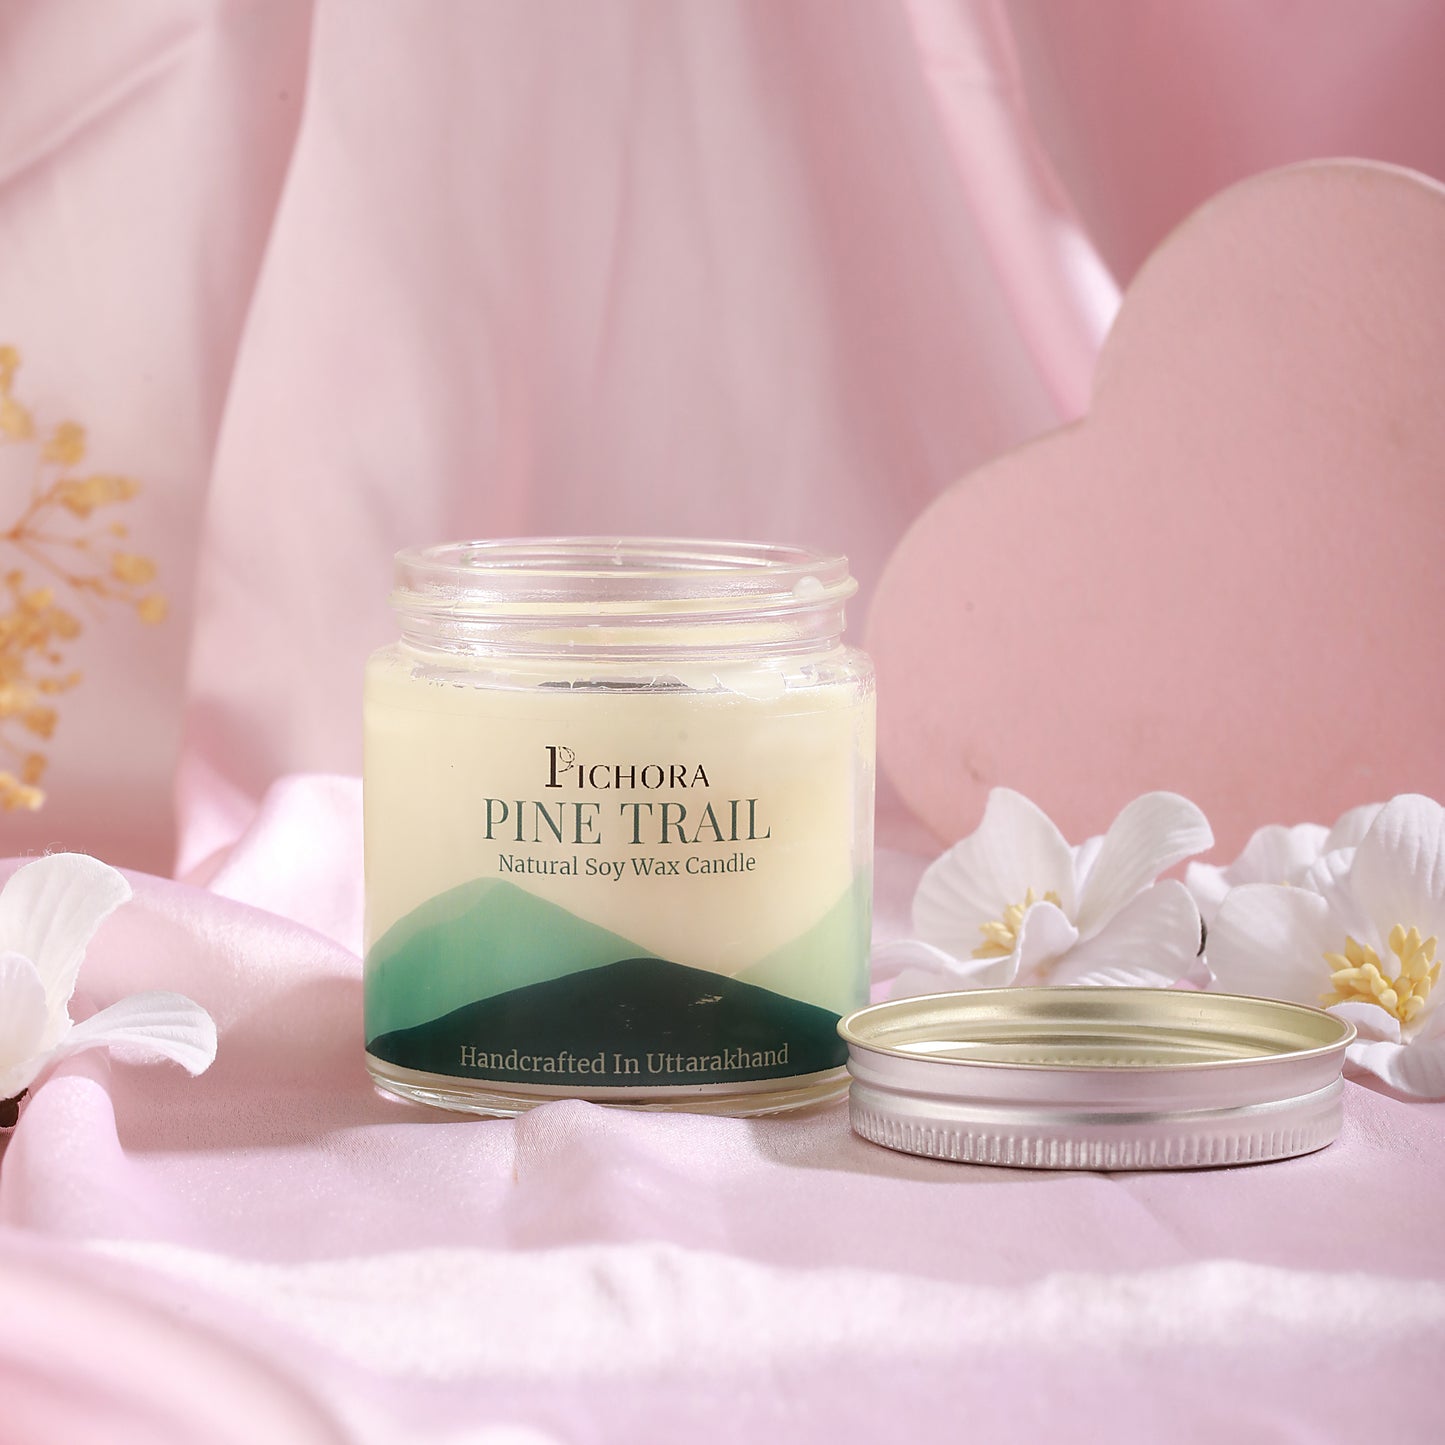 Pine trails - Soy Wax Candle